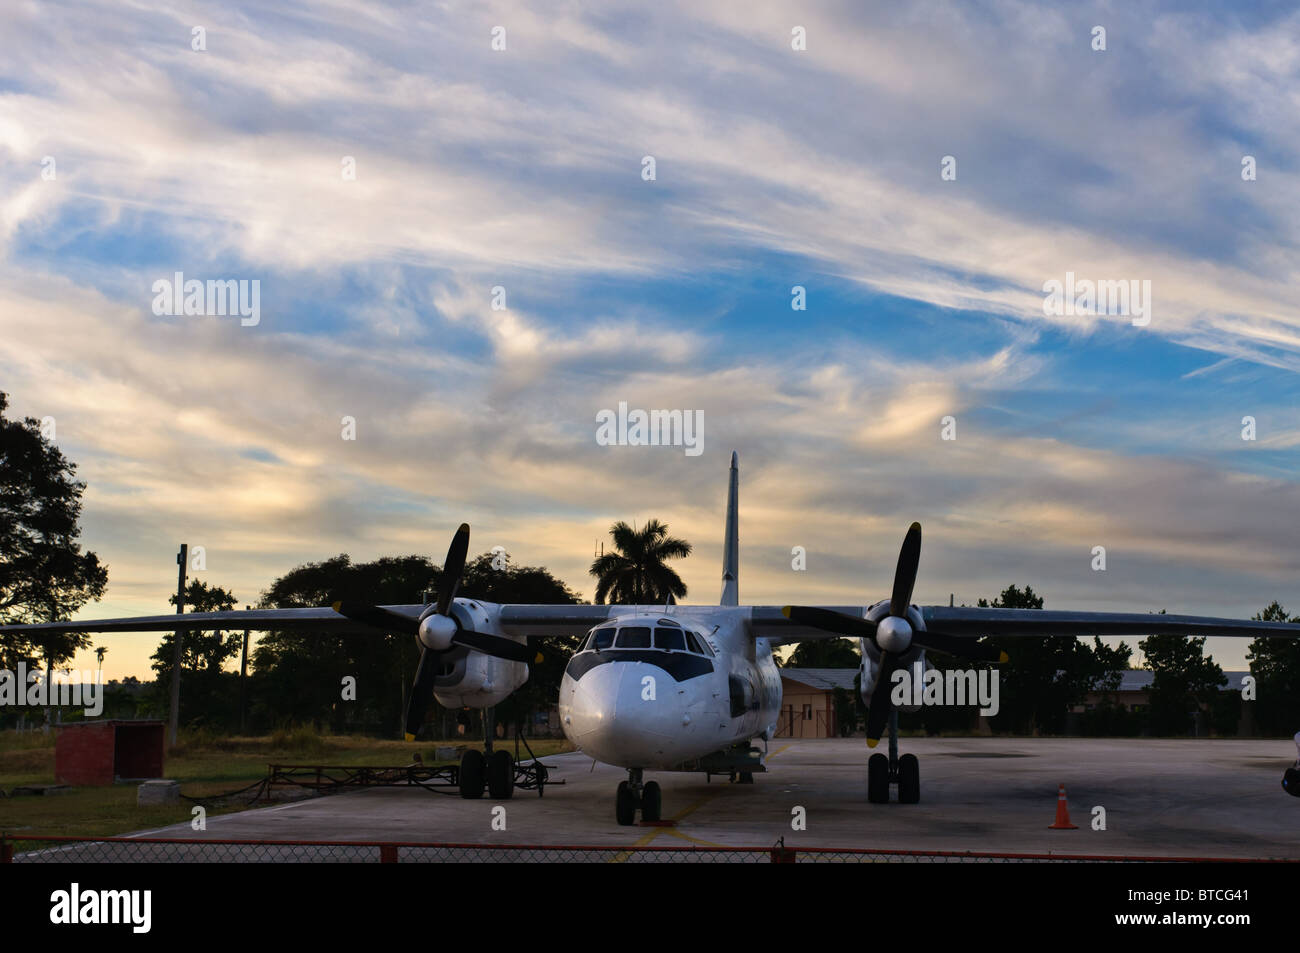 Small airplane in airport, Cuba Stock Photo